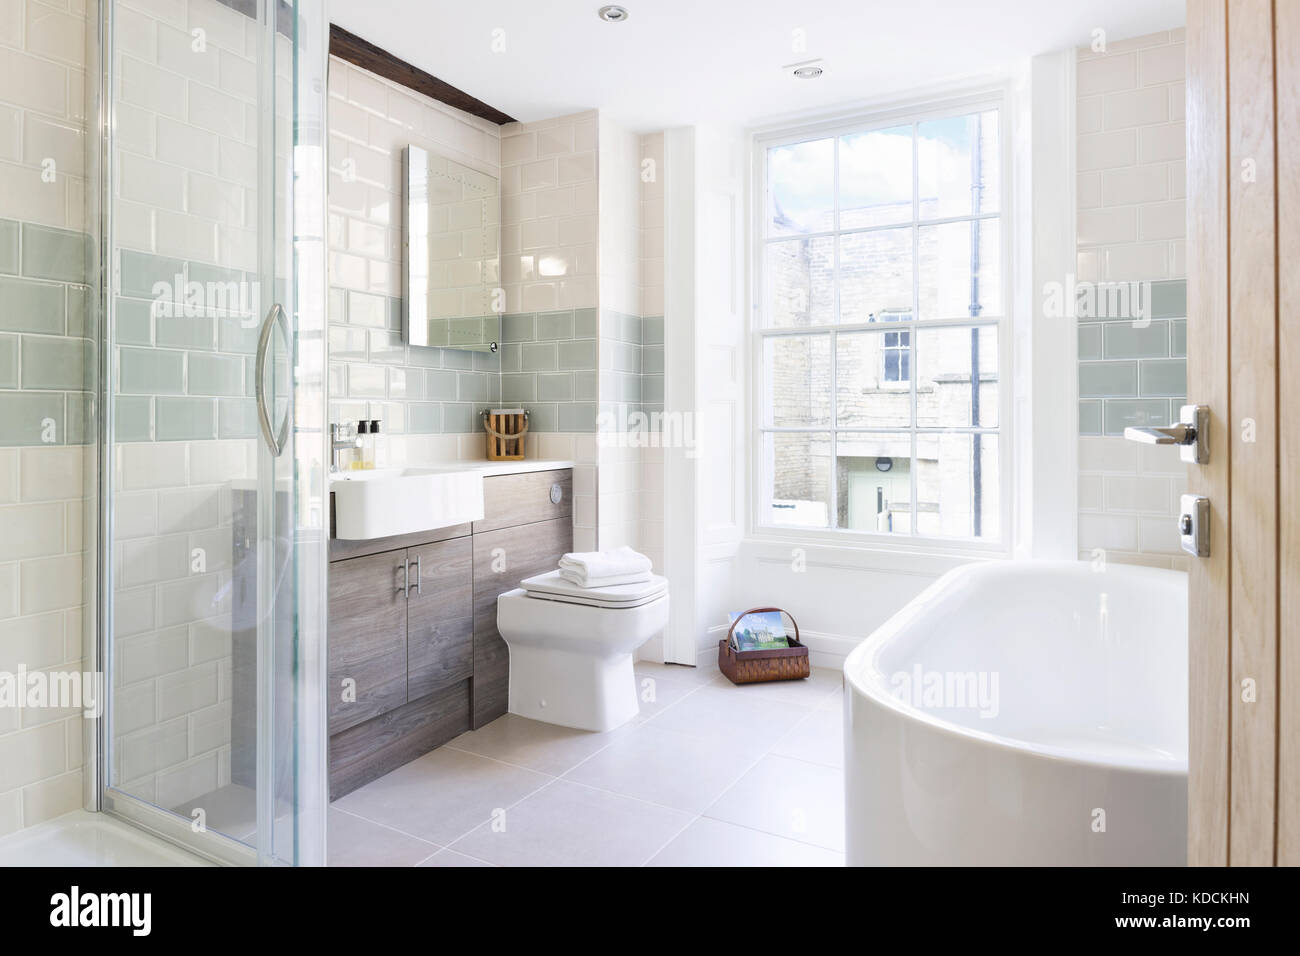 A contemporary, tiled remodelled bathroom in a redeveloped period UK home. Stock Photo